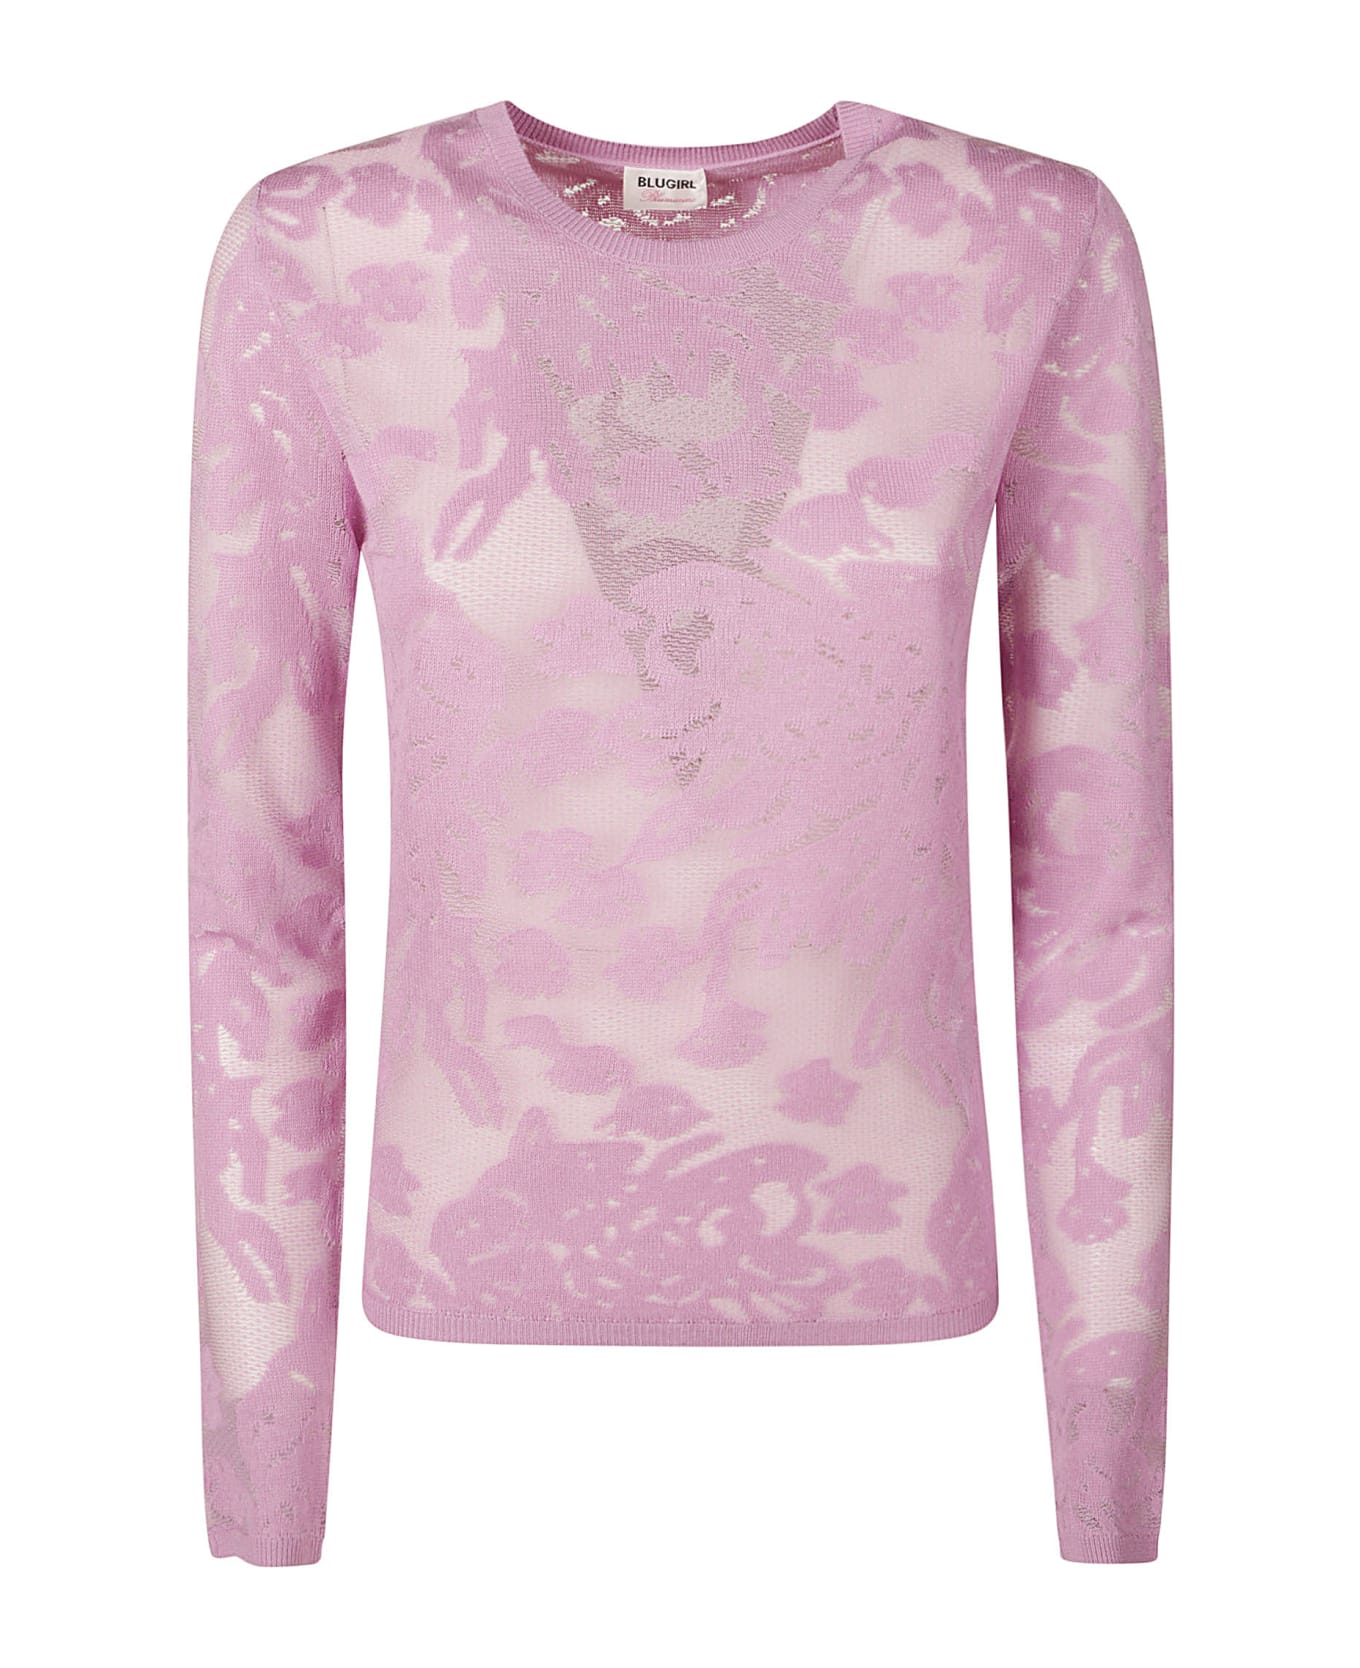 Blugirl Long-sleeved Floral Lace Top - Pink